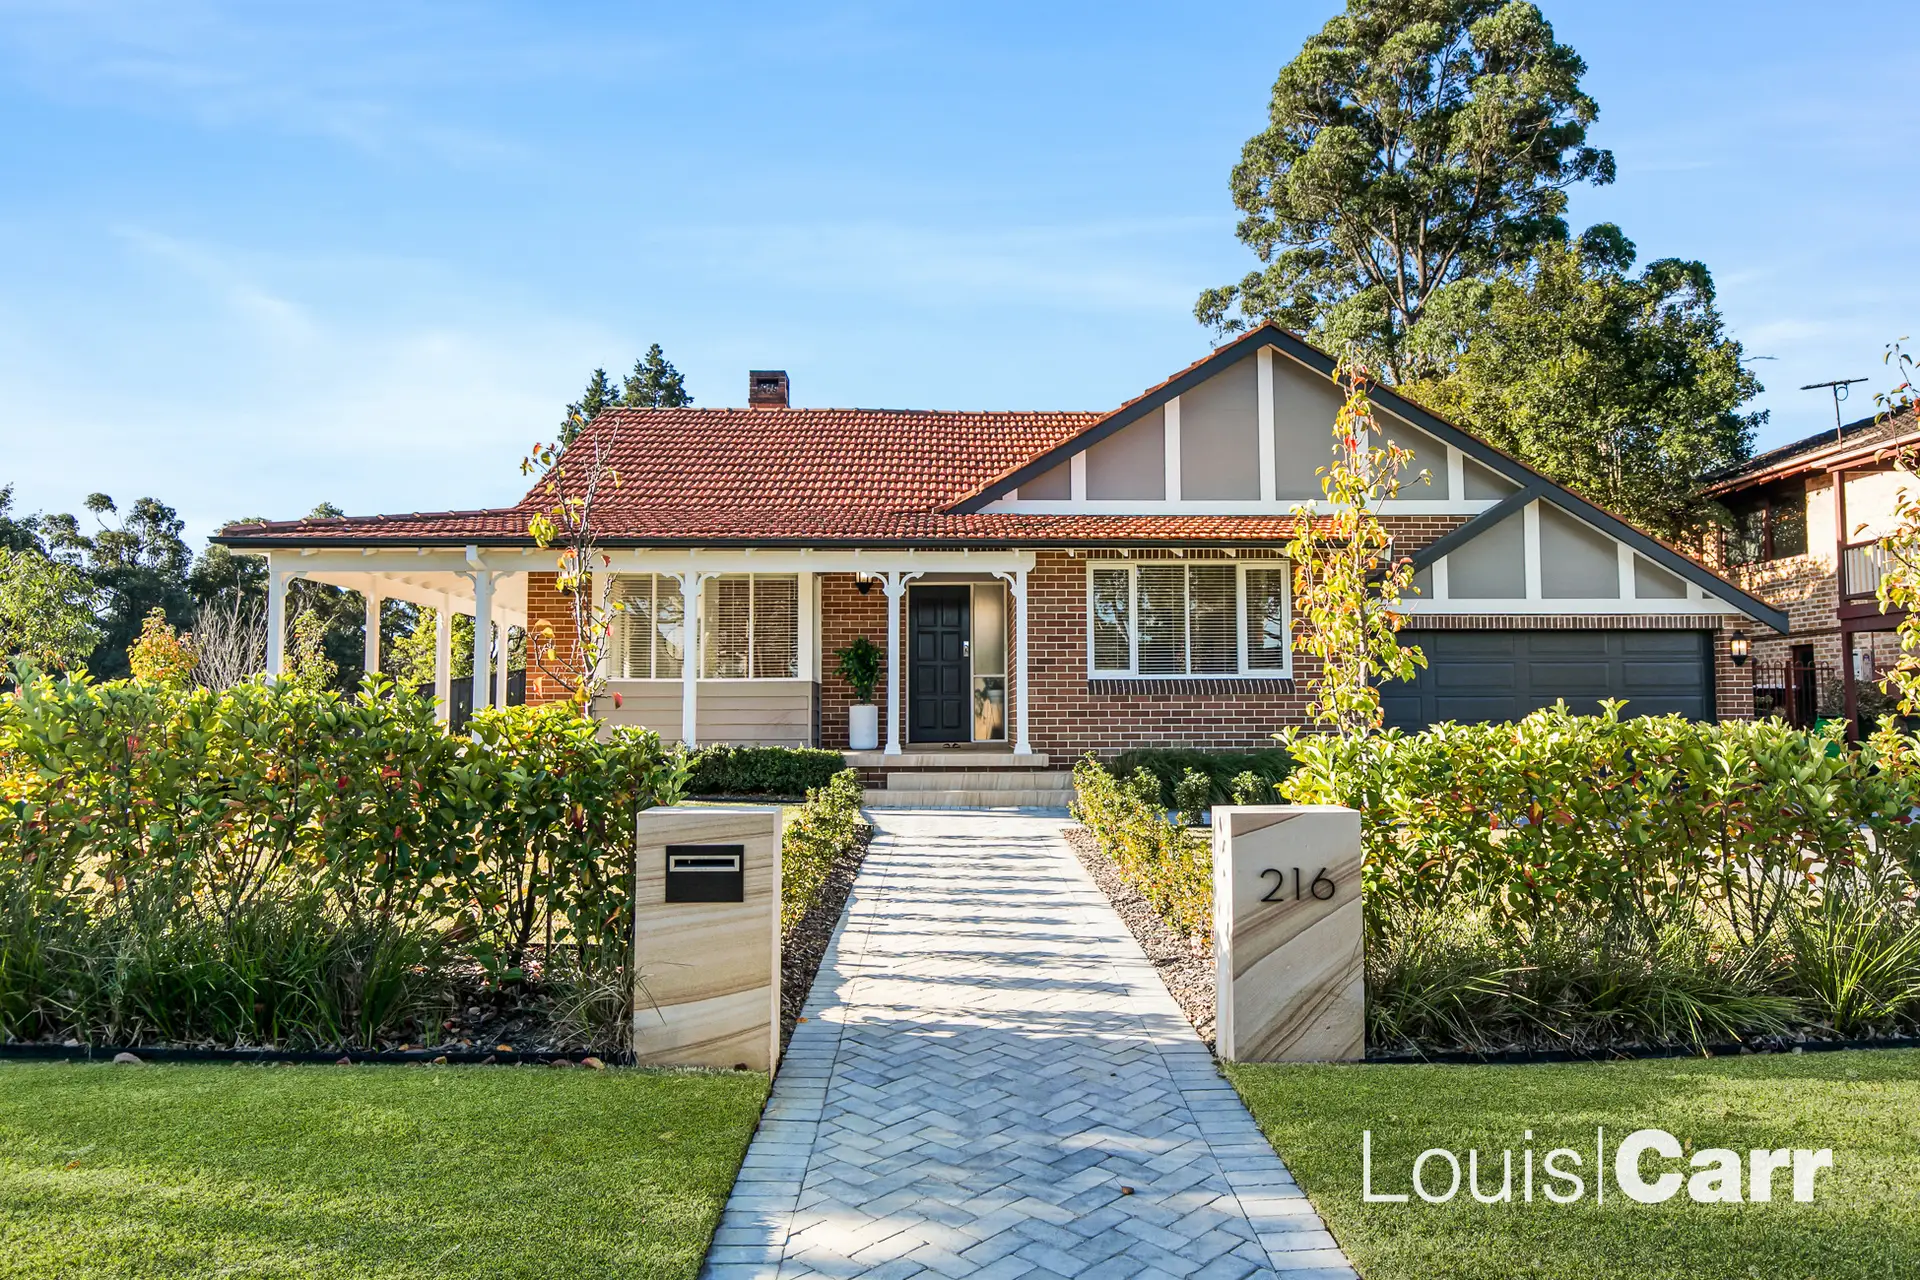 Photo #1: 216 Shepherds Drive, Cherrybrook - Sold by Louis Carr Real Estate